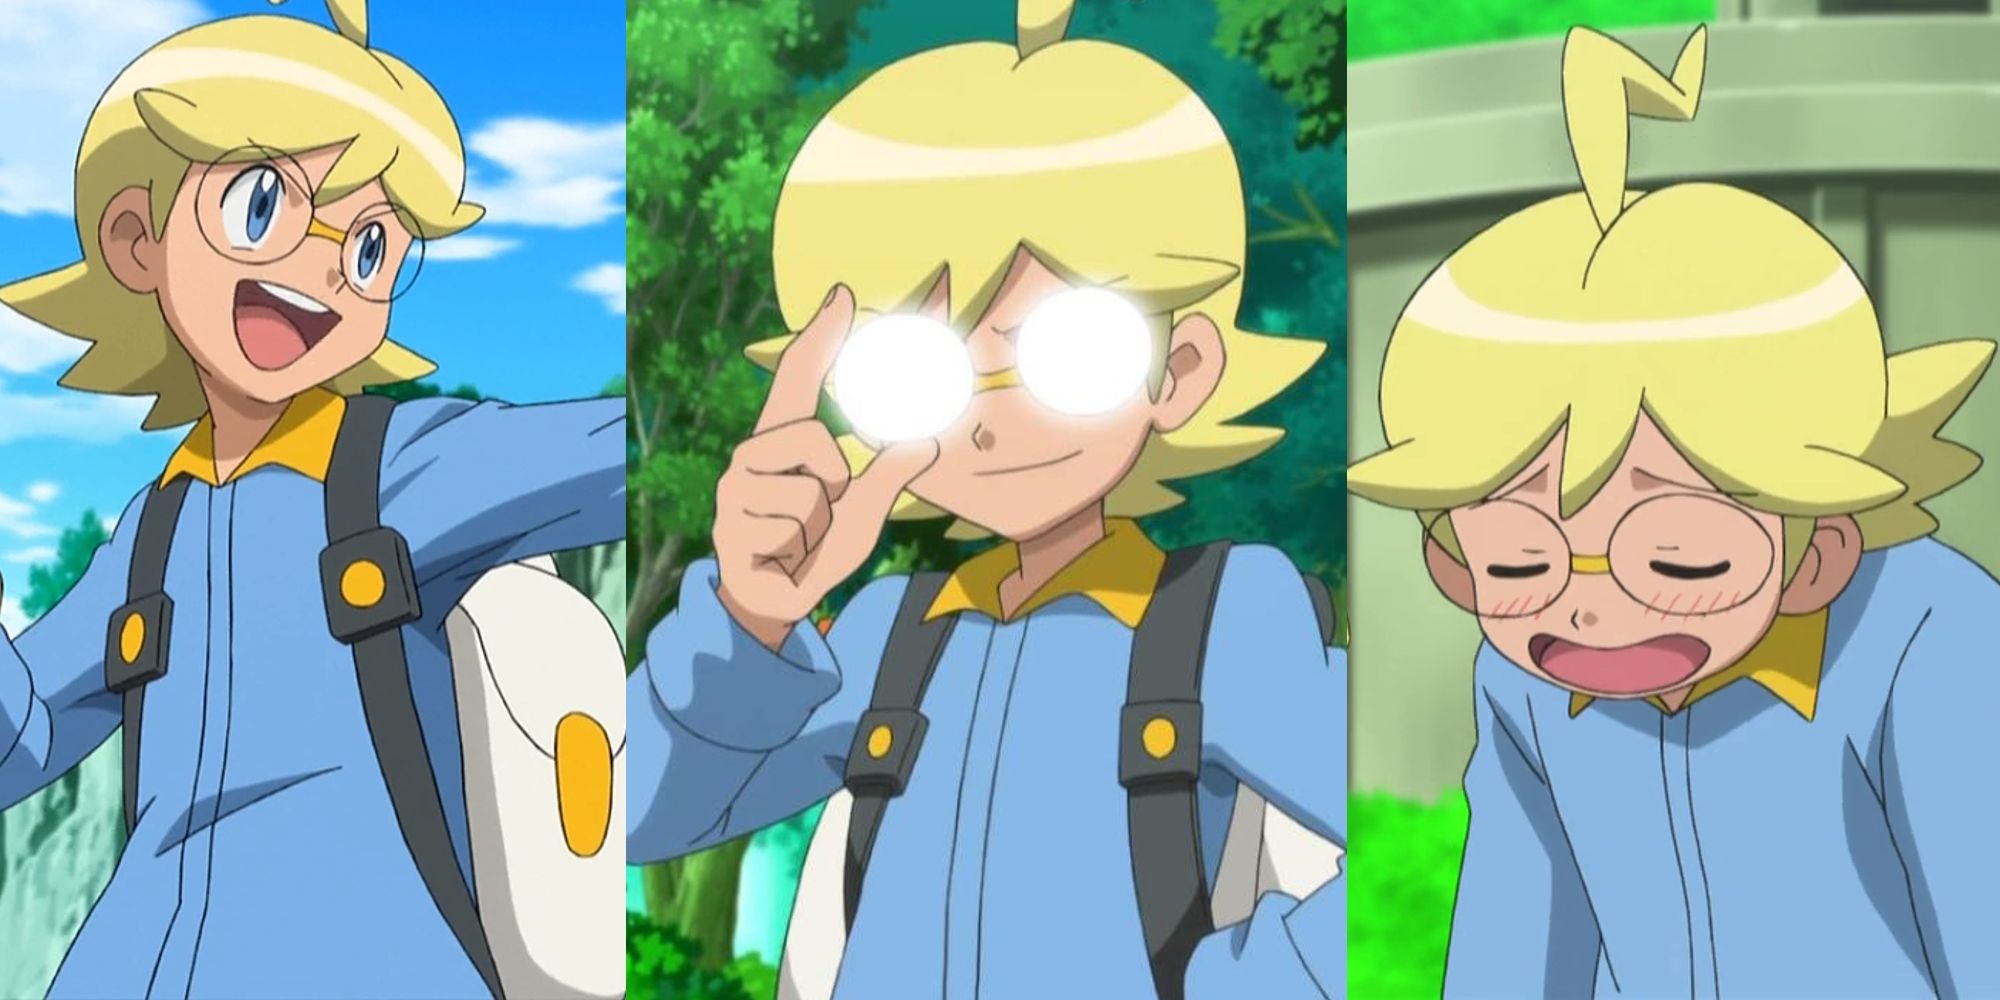 Clemont in battle in the anime; Clemont fixing his shining glasses; an exasperated Clemont in the anime